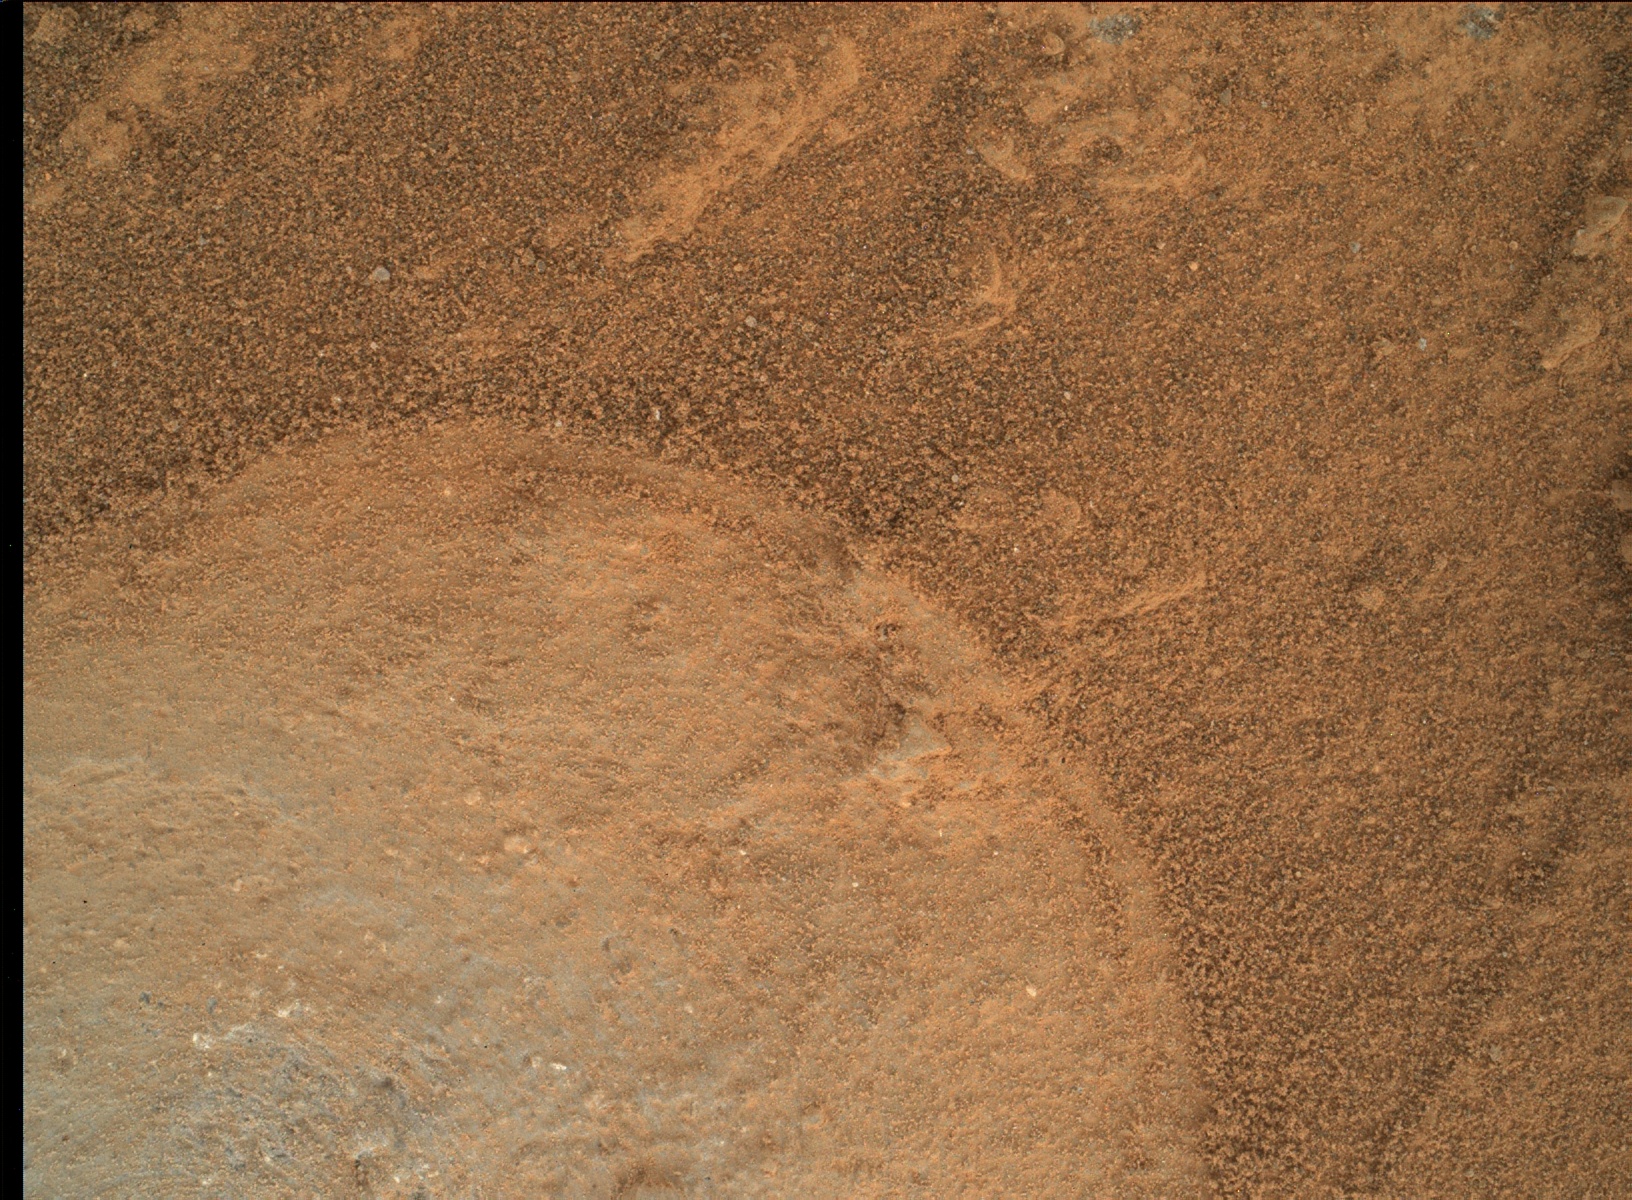 Nasa's Mars rover Curiosity acquired this image using its Mars Hand Lens Imager (MAHLI) on Sol 724